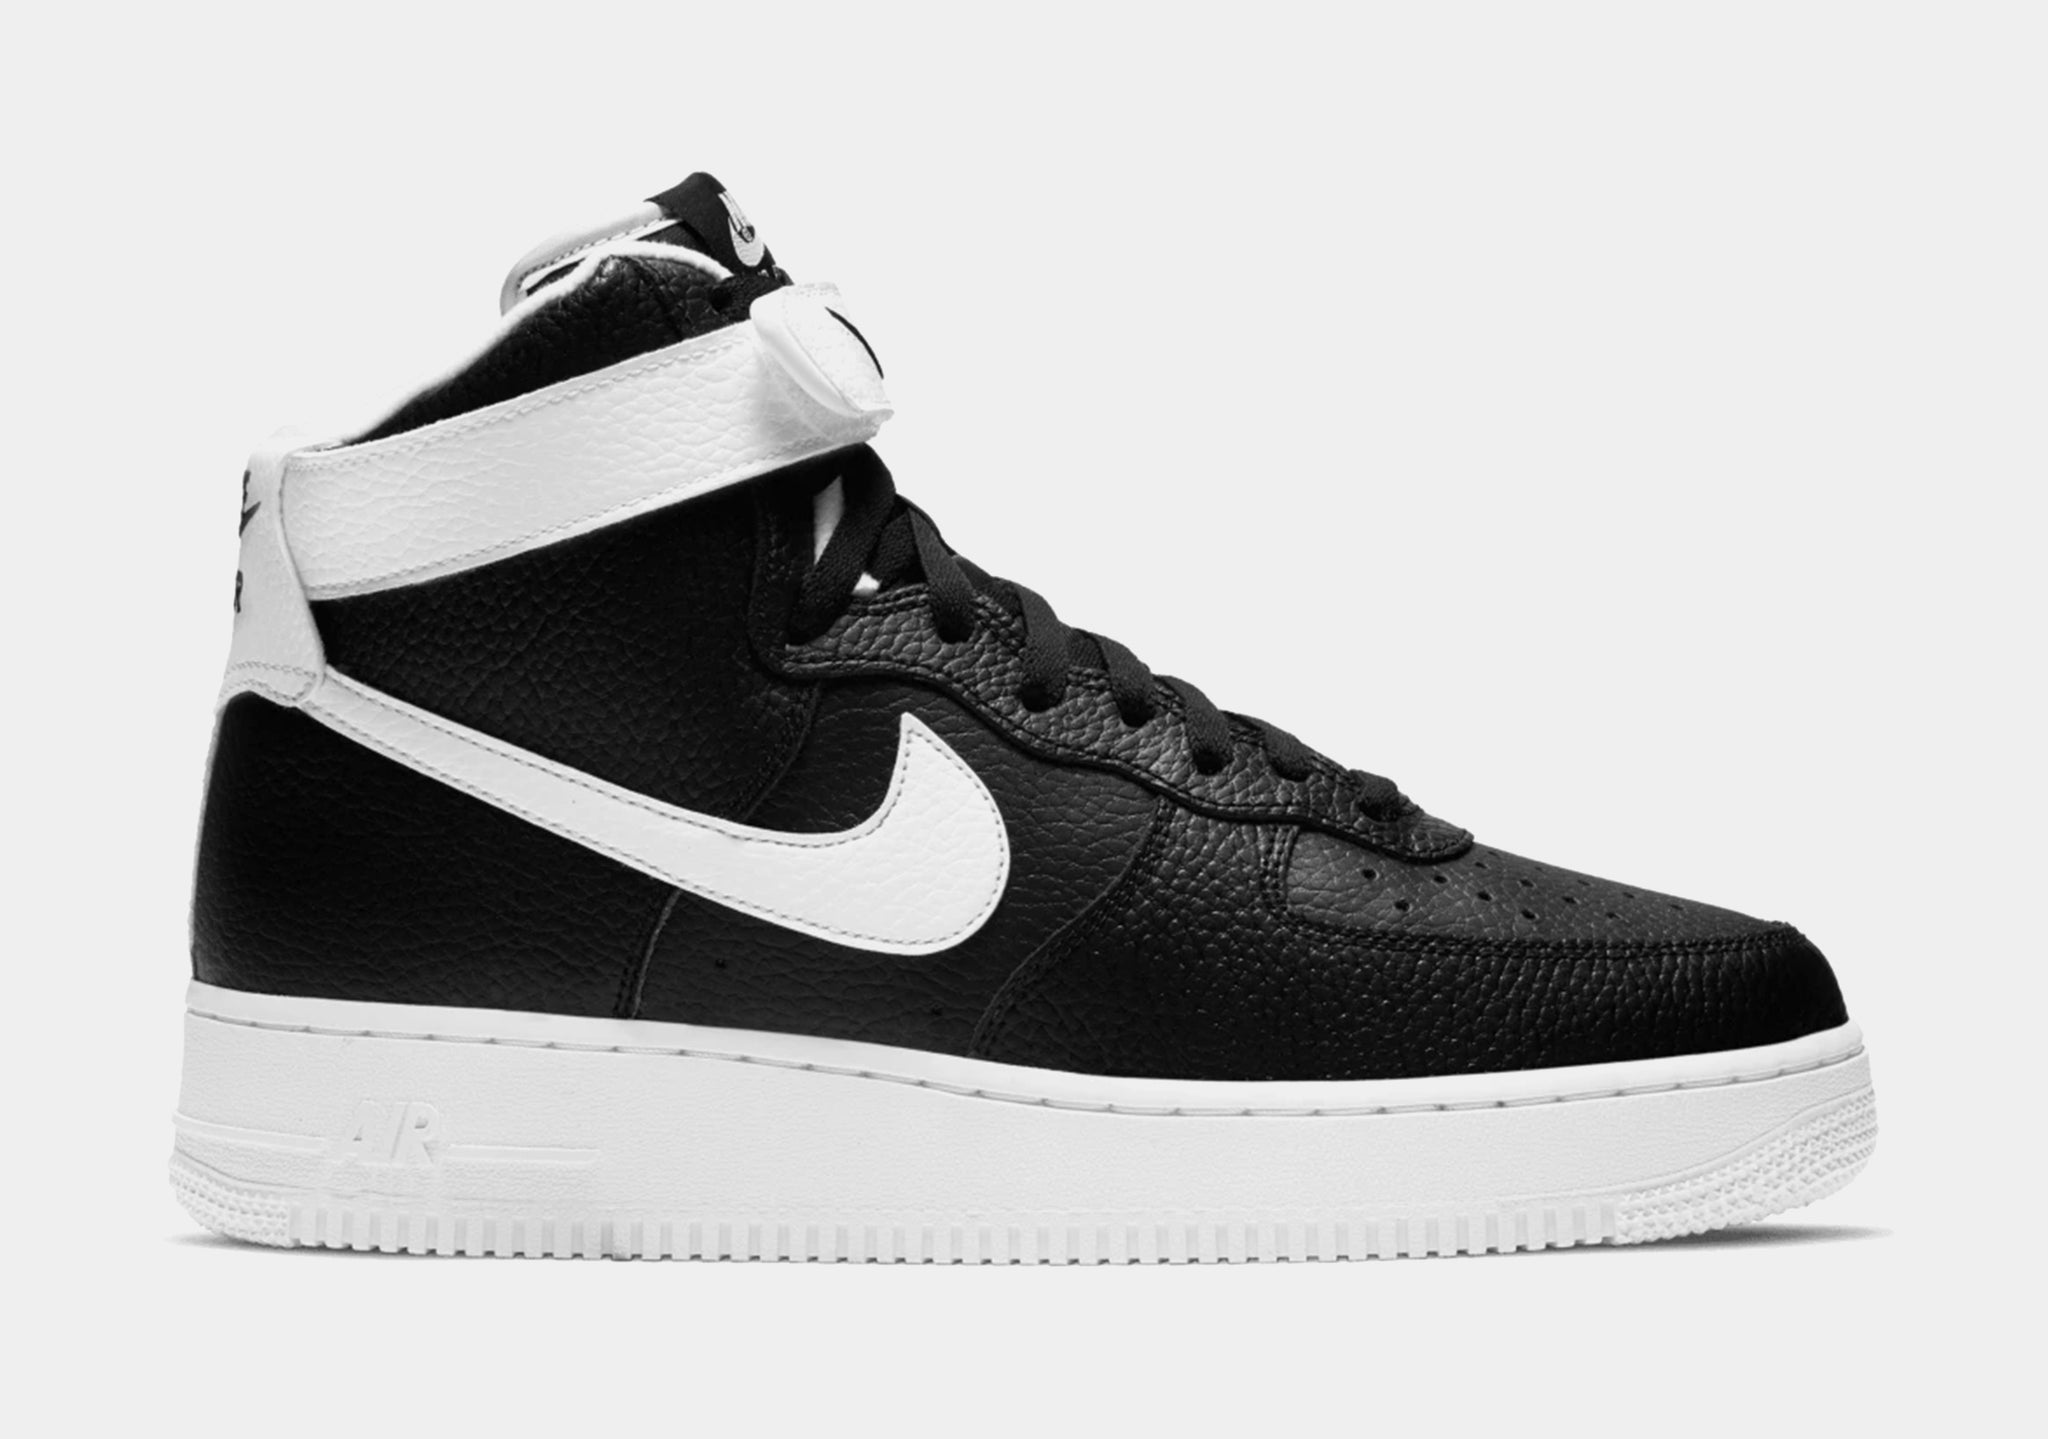 Nike Air Force 1 '07 High Mens Lifestyle Shoes Black CT2303-002